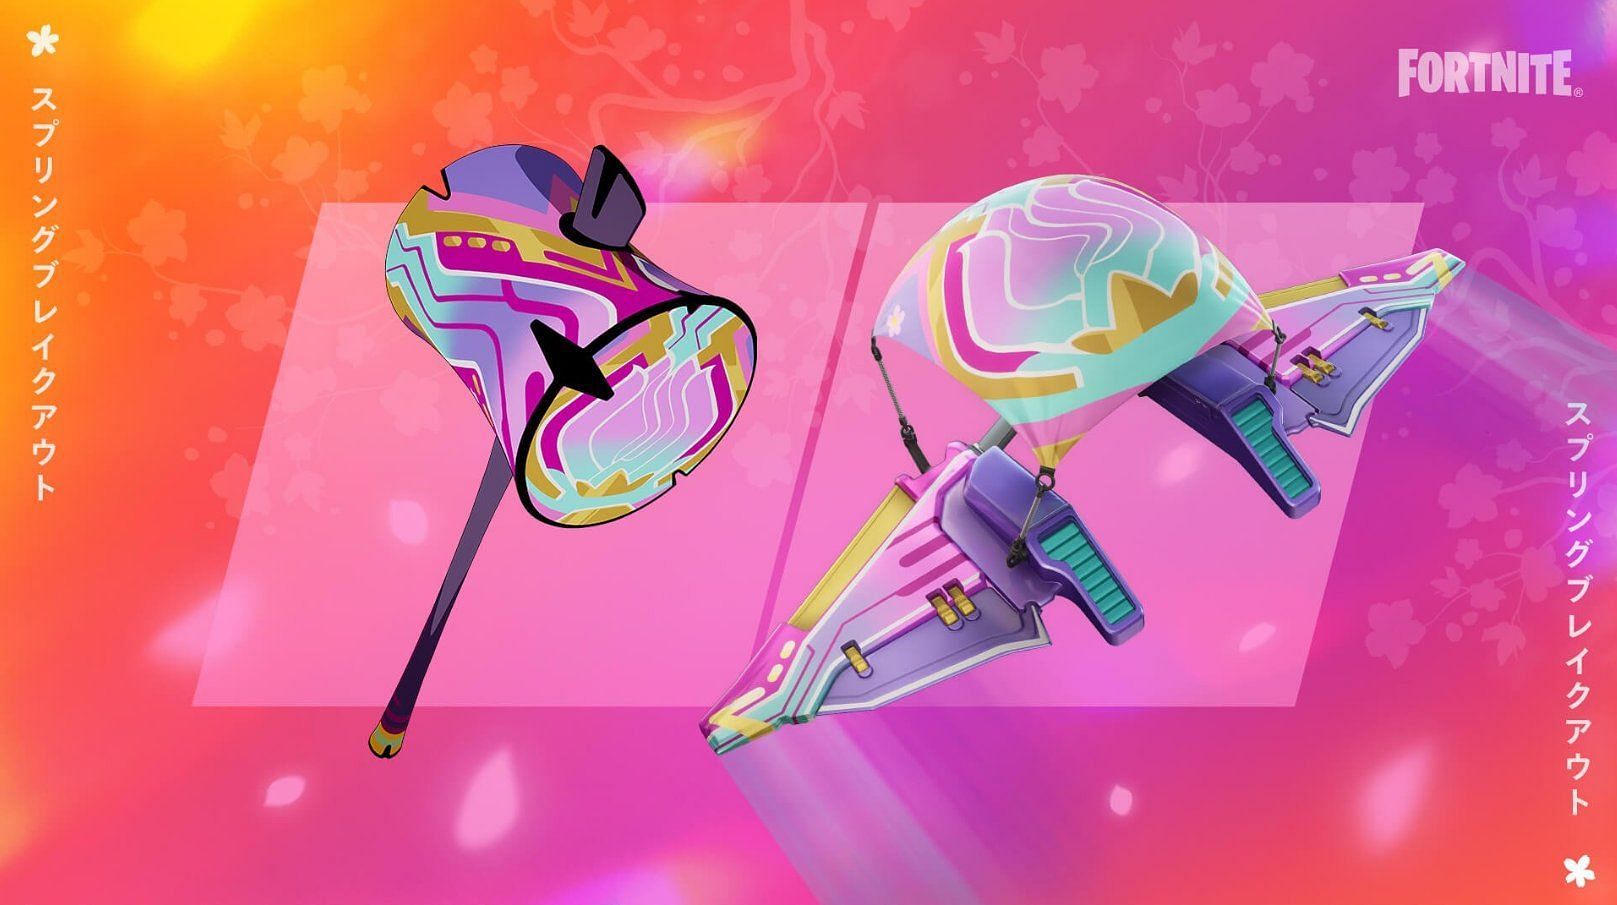 Fortnite Spring Breakout quests reward free cosmetic items (Image via Epic Games)